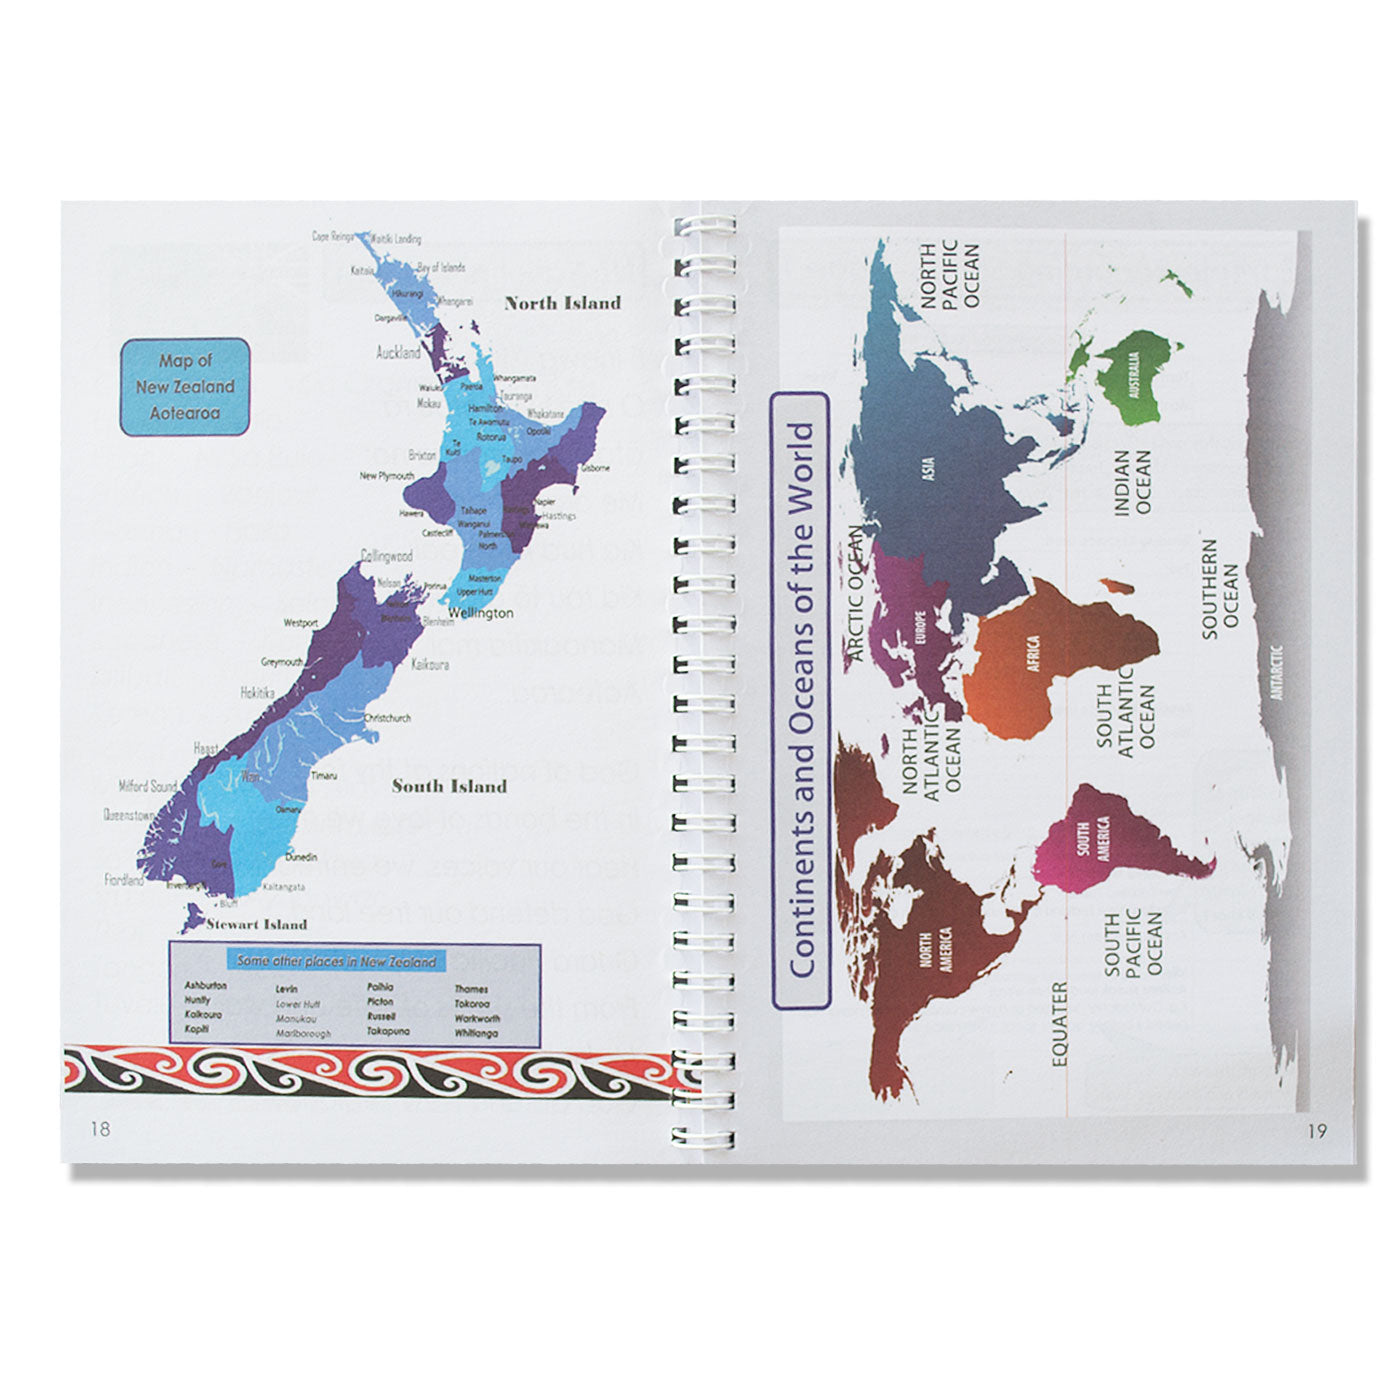 Students Diary Senior Level Reflections NZ Version Years 6 to 8 